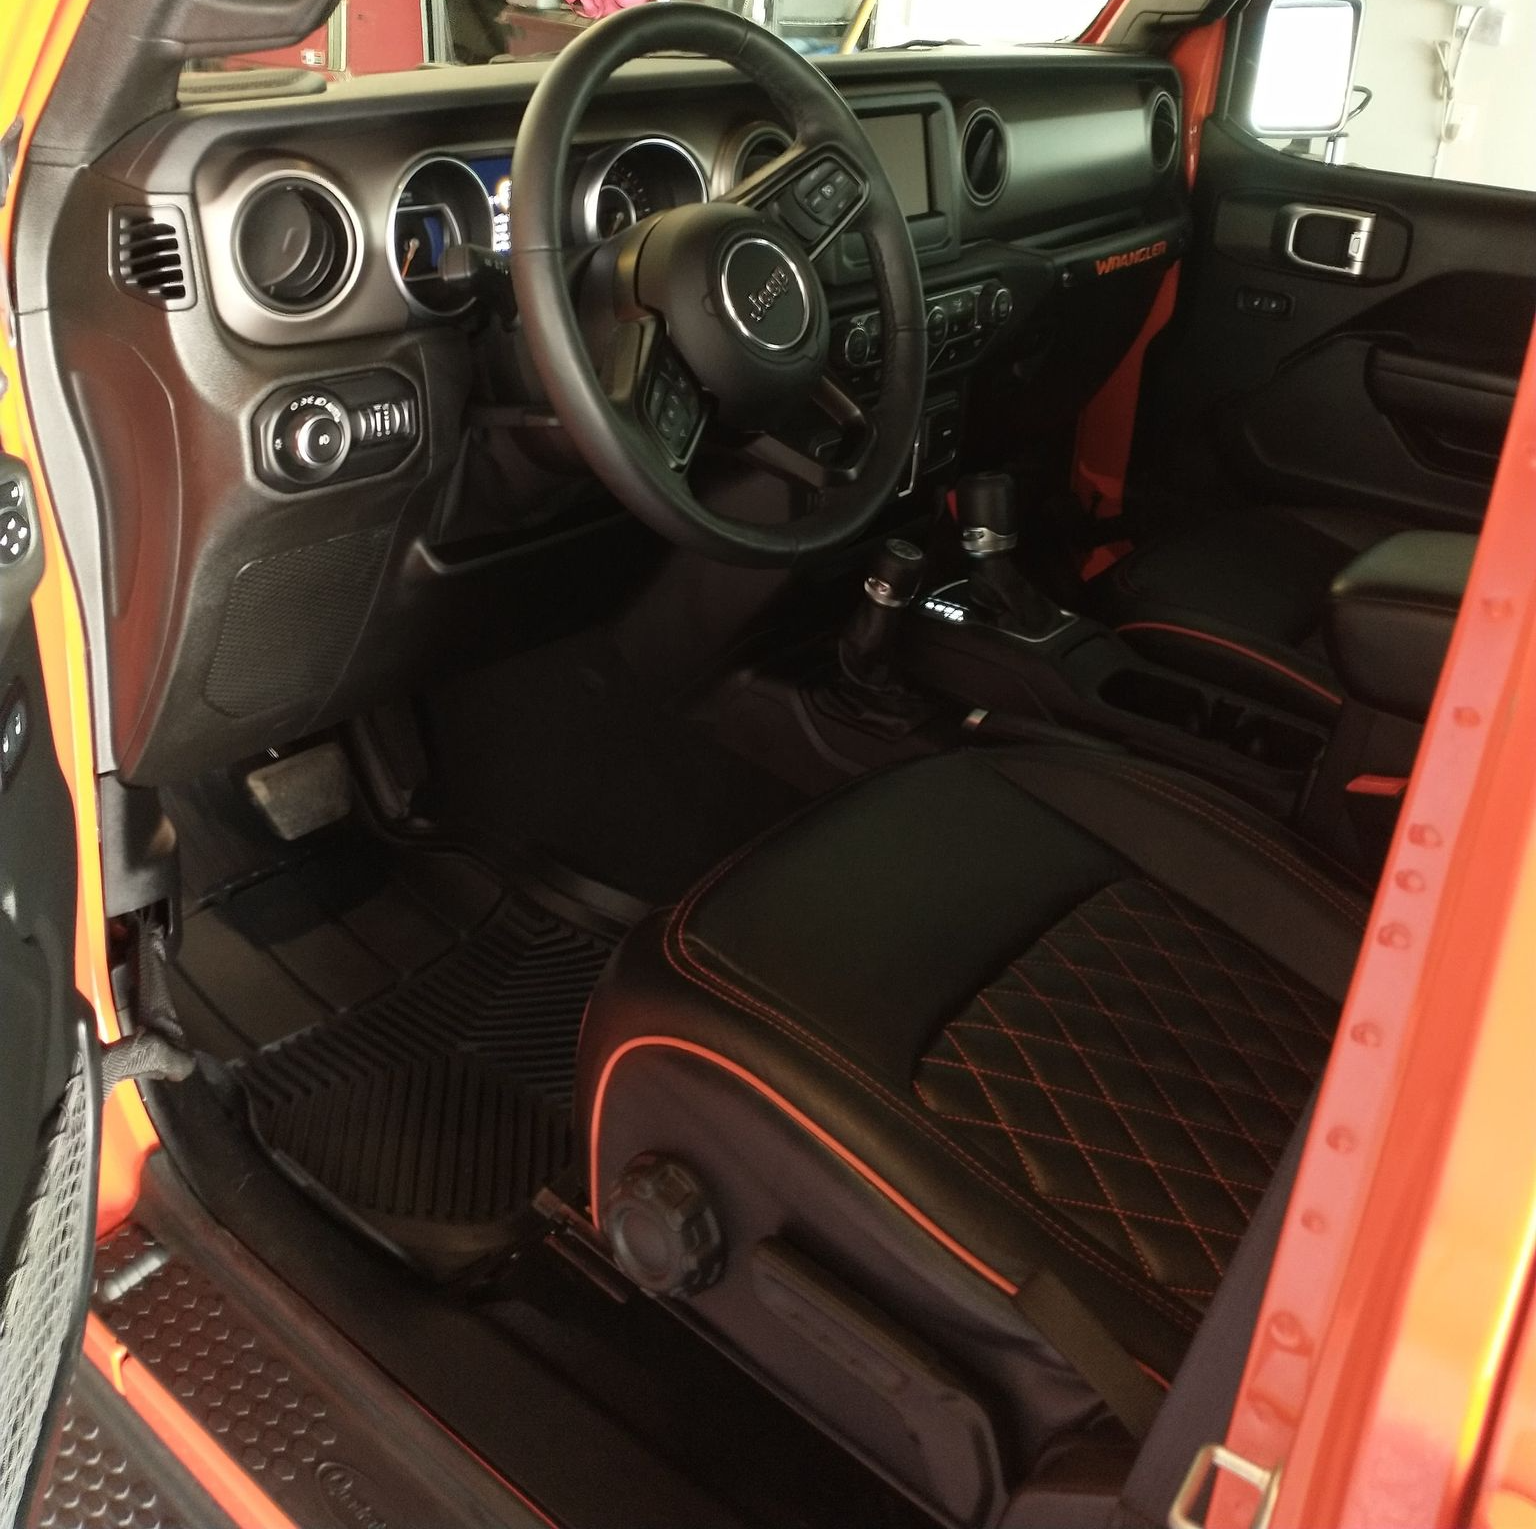 A vehicles interior thats black leather with a large screen display